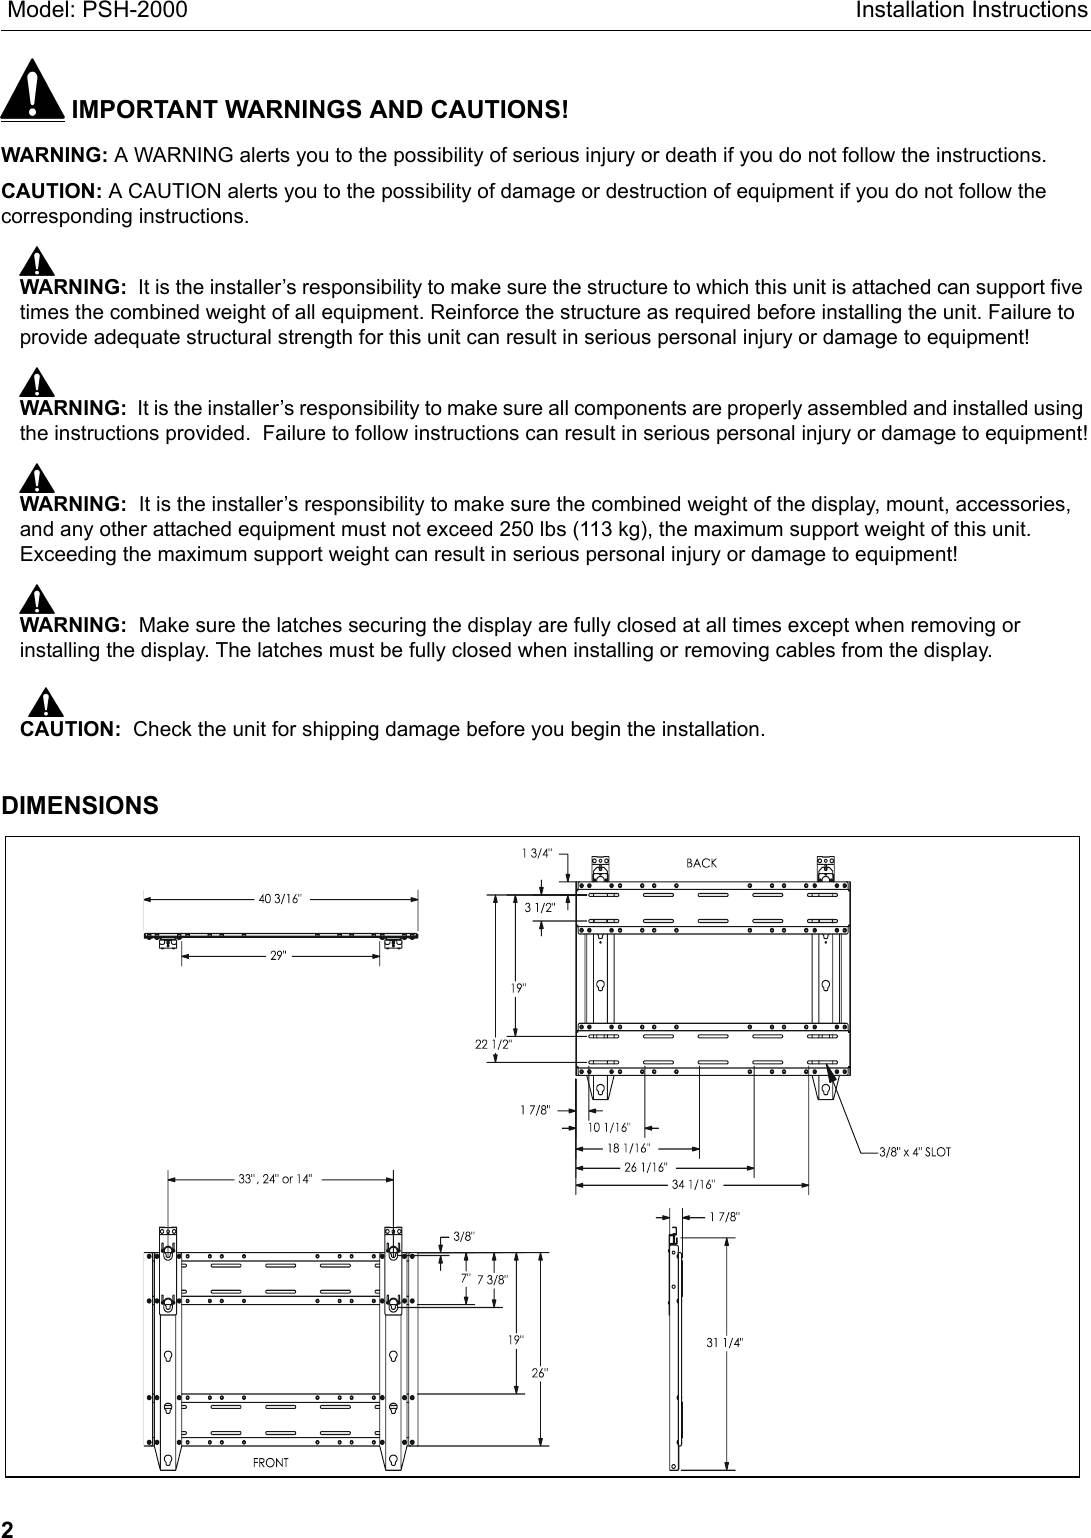 Page 2 of 8 - Chief-Manufacturing Chief-Manufacturing-Psh-2000-Users-Manual- PSH2000 INSTALLATION INSTRUCTIONS  Chief-manufacturing-psh-2000-users-manual